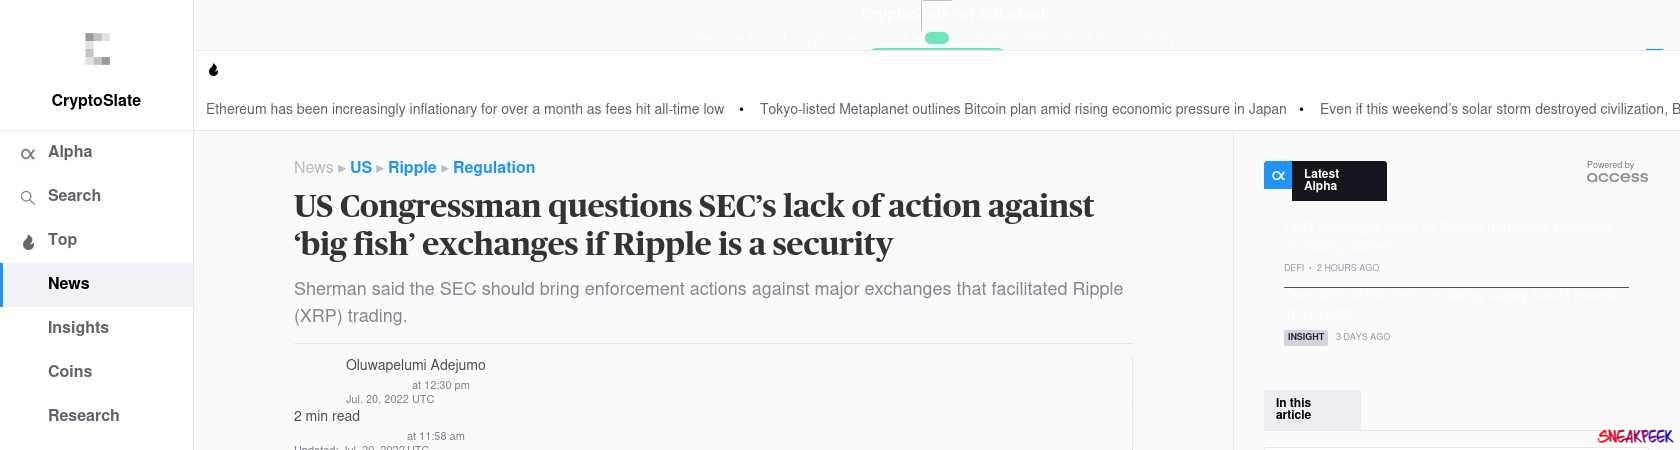 Read the full Article:  ⭲ US Congressman questions SEC’s lack of action against ‘big fish’ exchanges if Ripple is a security